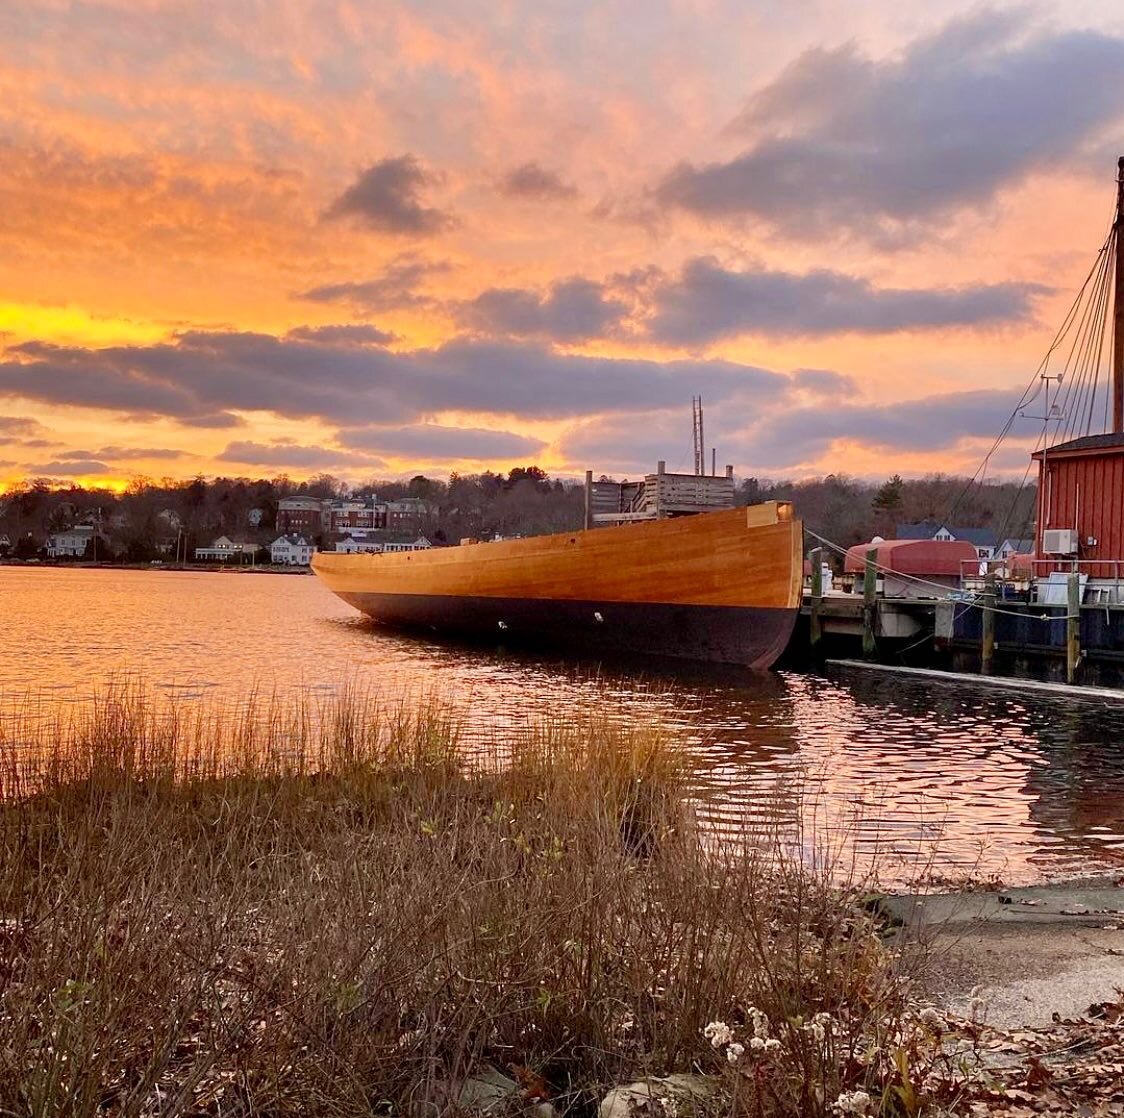 Coronet at her new home in Mystic 
Via @therealjameskirschner